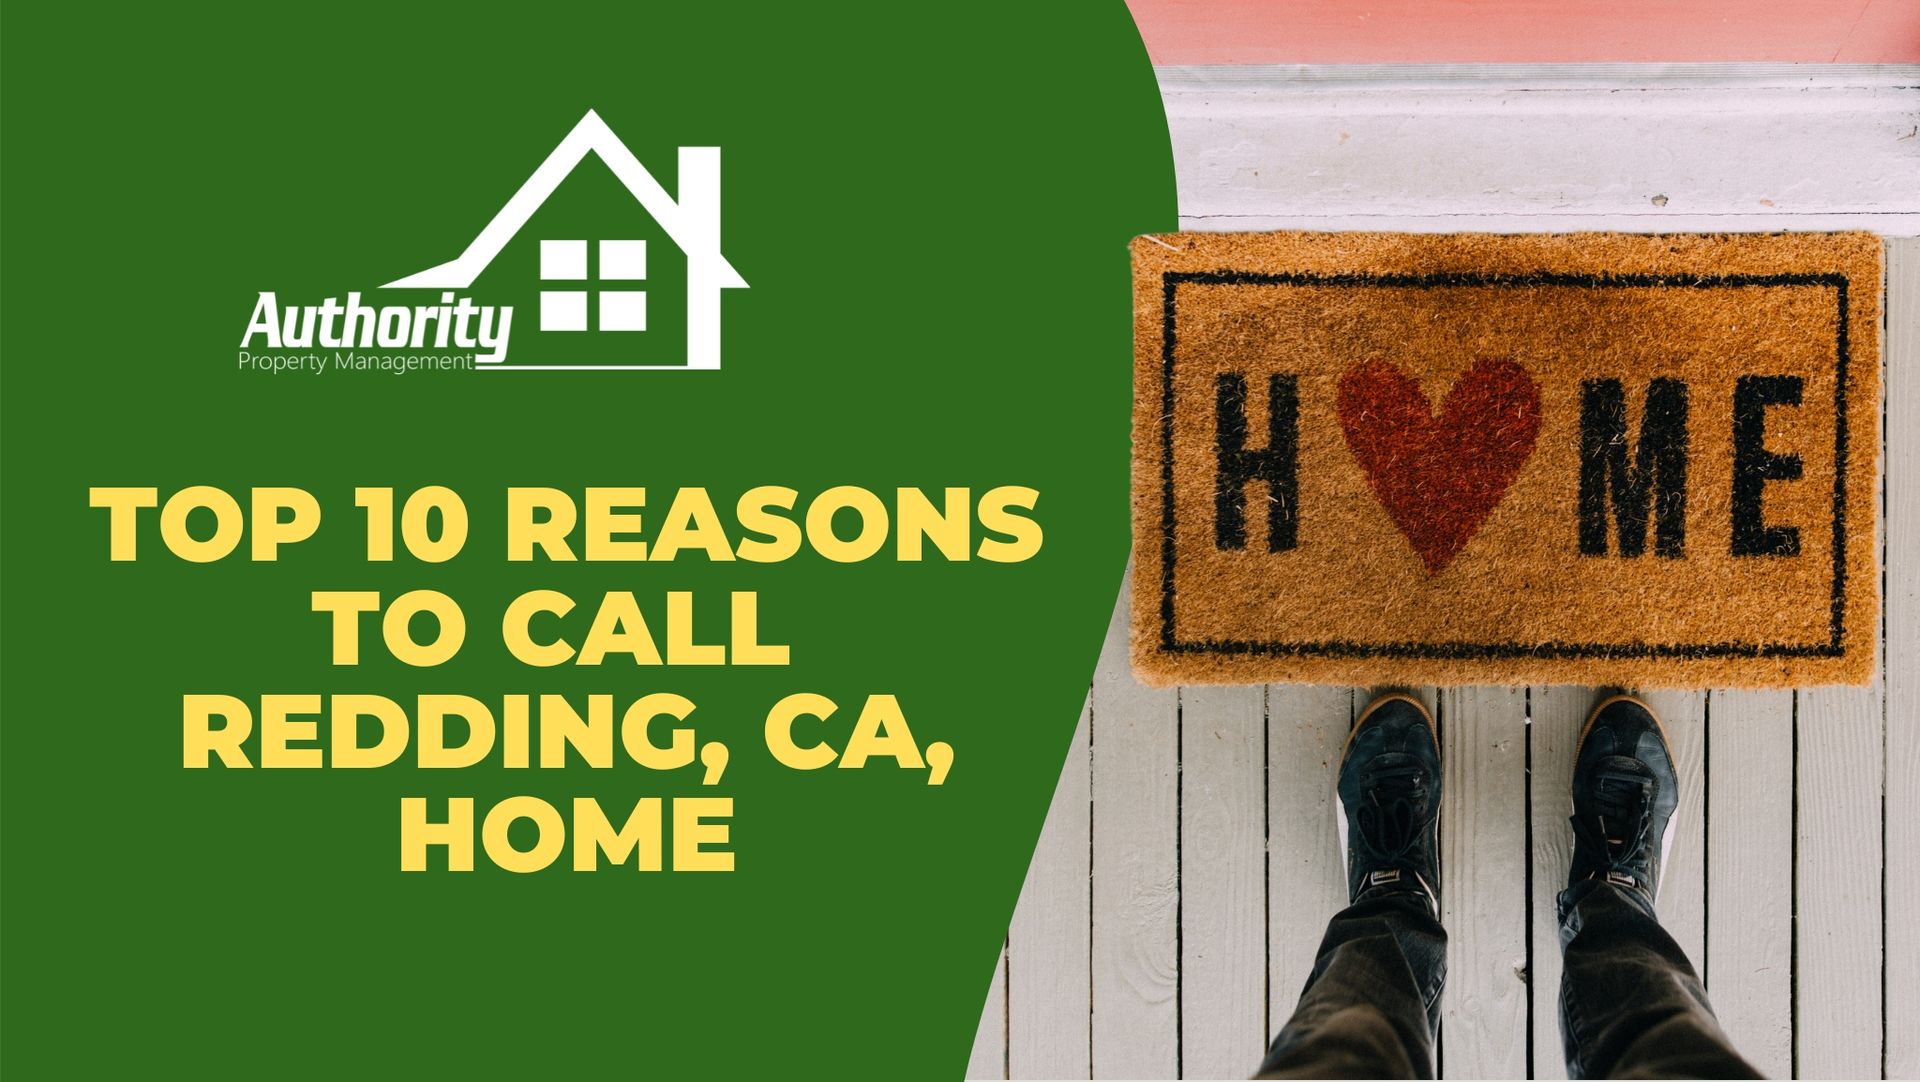 Welcome to Redding, California – Your Top 10 Reasons to Call This Place Home!